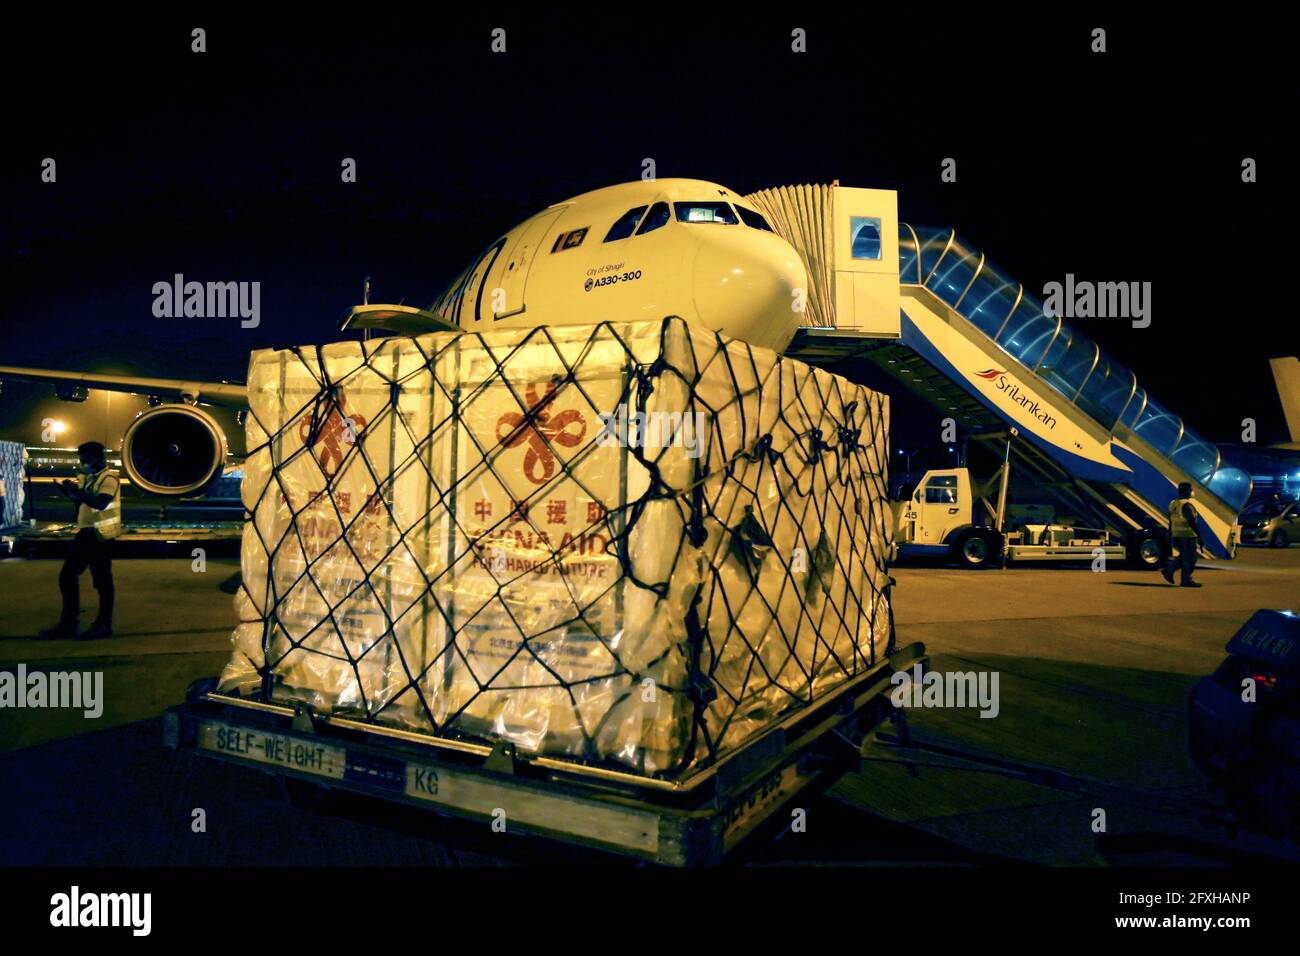 Colombo. 26th May, 2021. A batch of Sinopharm COVID-19 vaccines donated by the Chinese government arrives at the Bandaranaike International Airport in Colombo, Sri Lanka, May 26, 2021 Credit: Ajith Perera/Xinhua/Alamy Live News Stock Photo